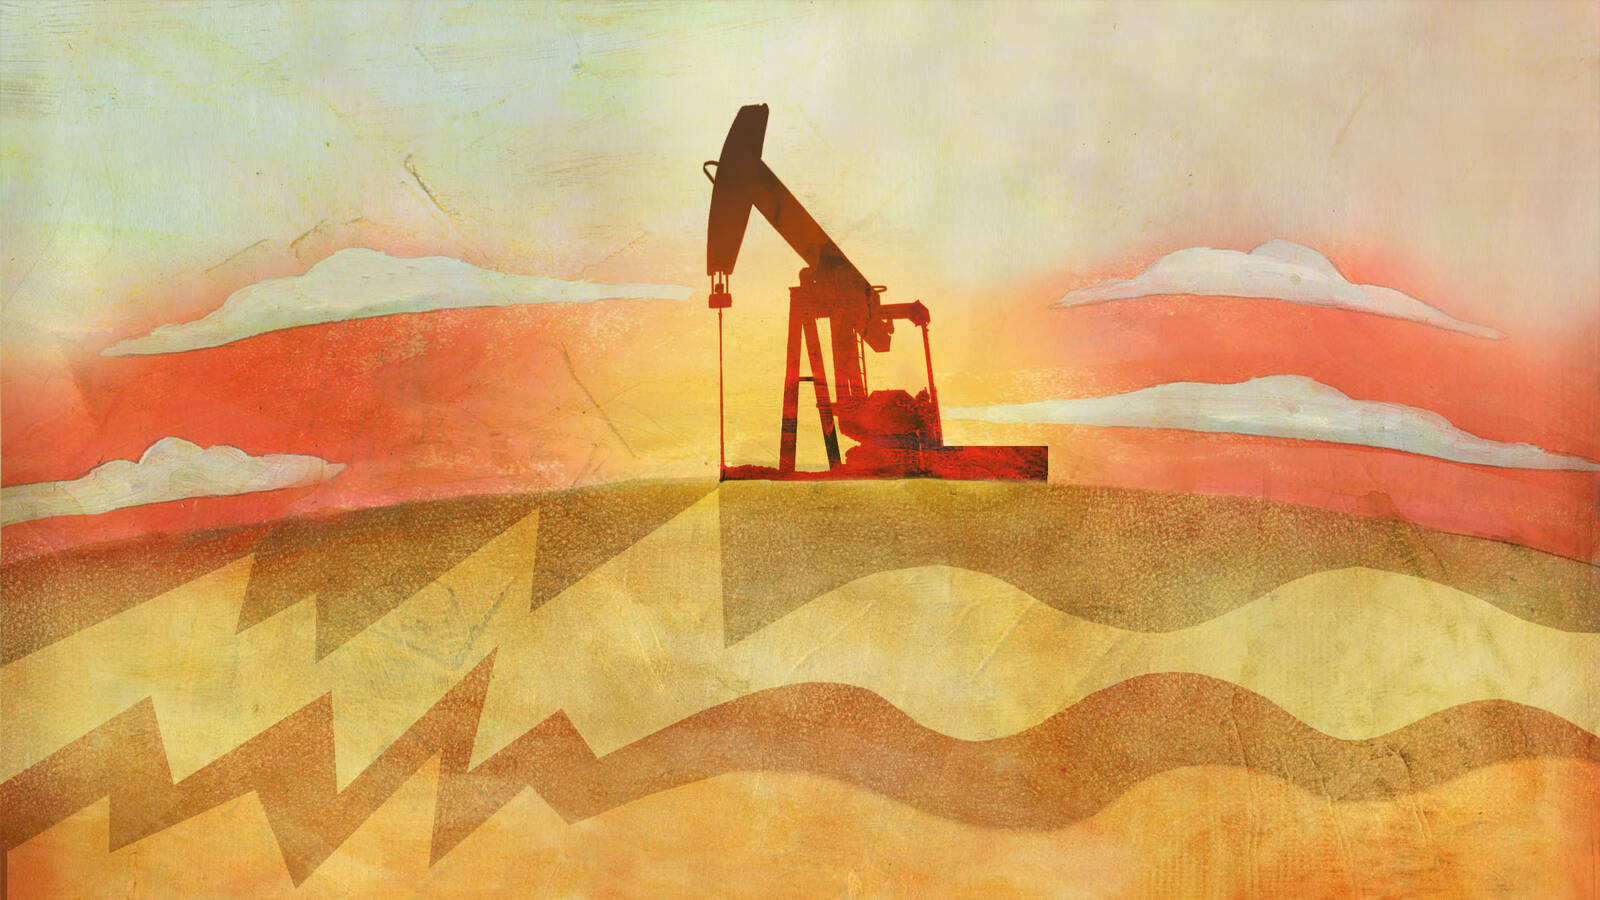 Because oil prices are so volatile, oil price forecasts are both useful and necessary.